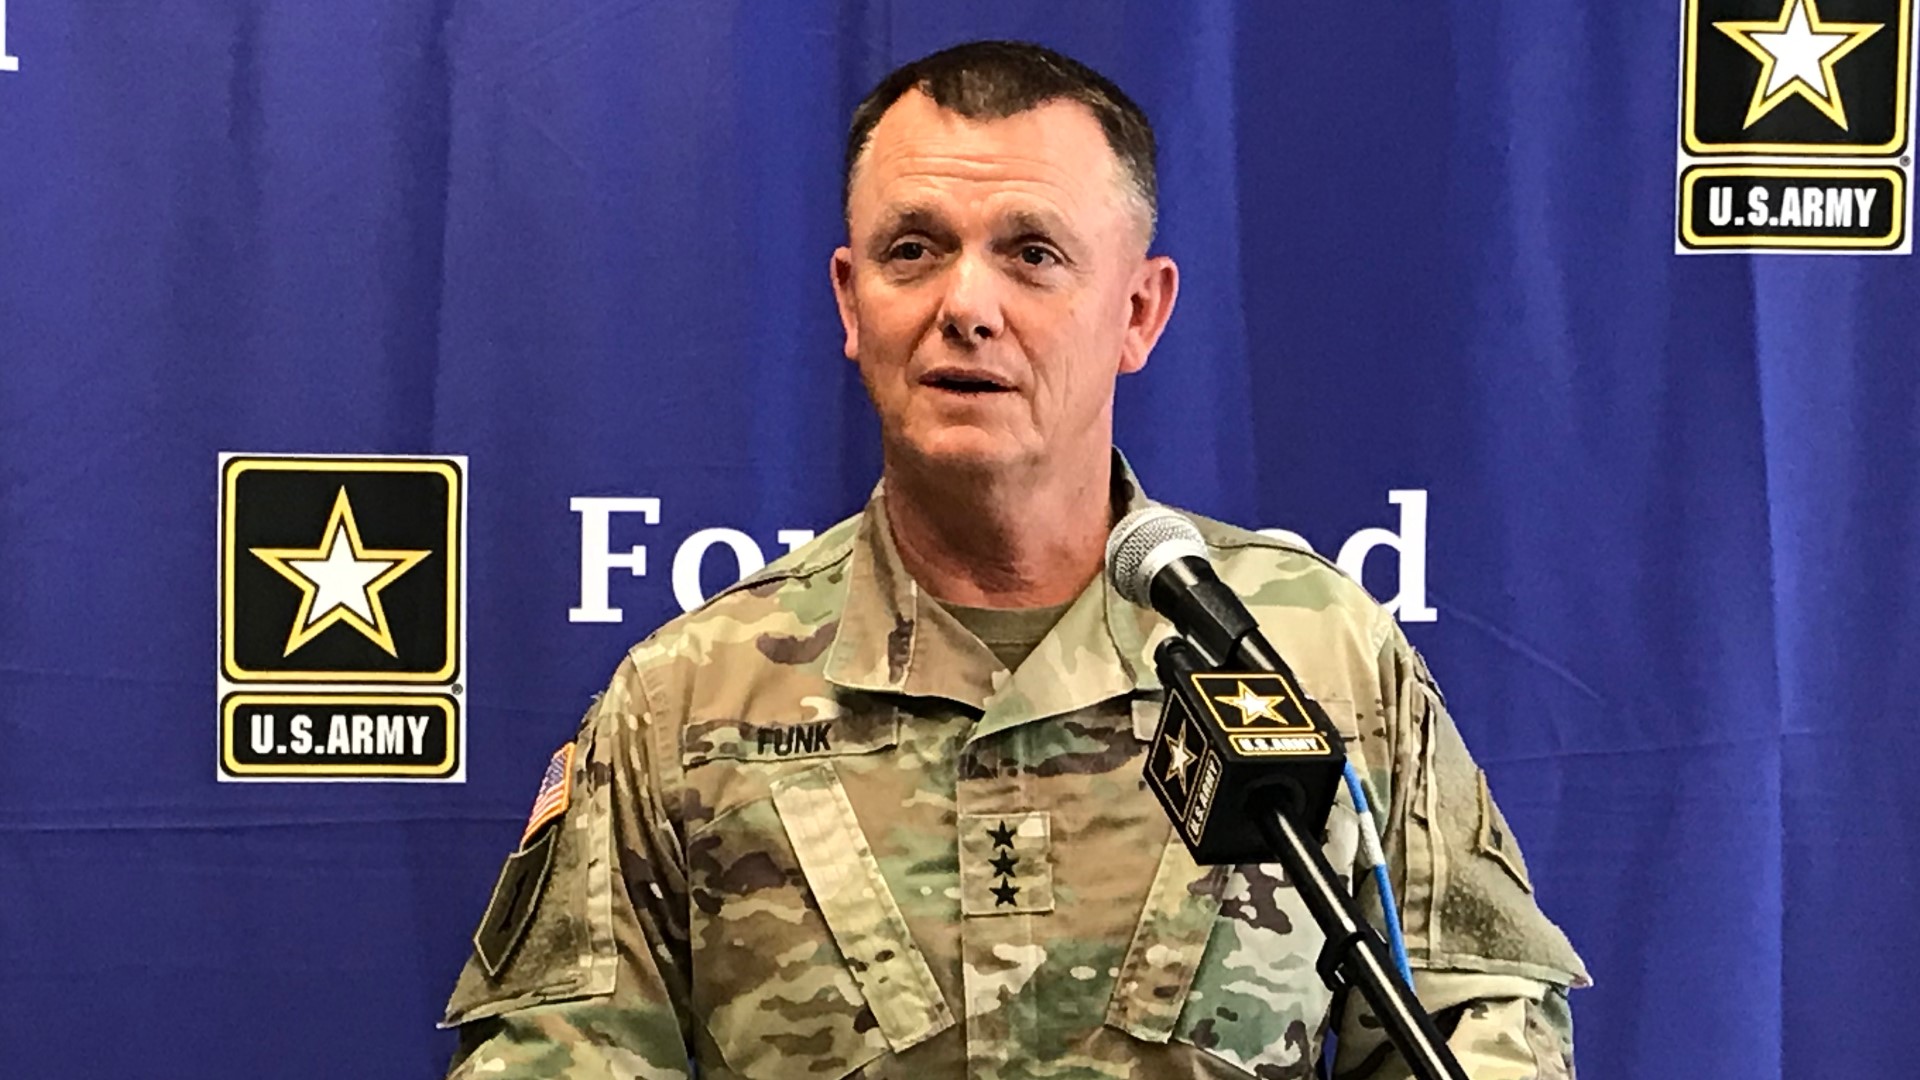 Funk II was promoted last month to the rank of general and he will be the new commanding general of U.S. Army Training and Doctrine Command at Joint Base Langley-Eustis, Virginia.